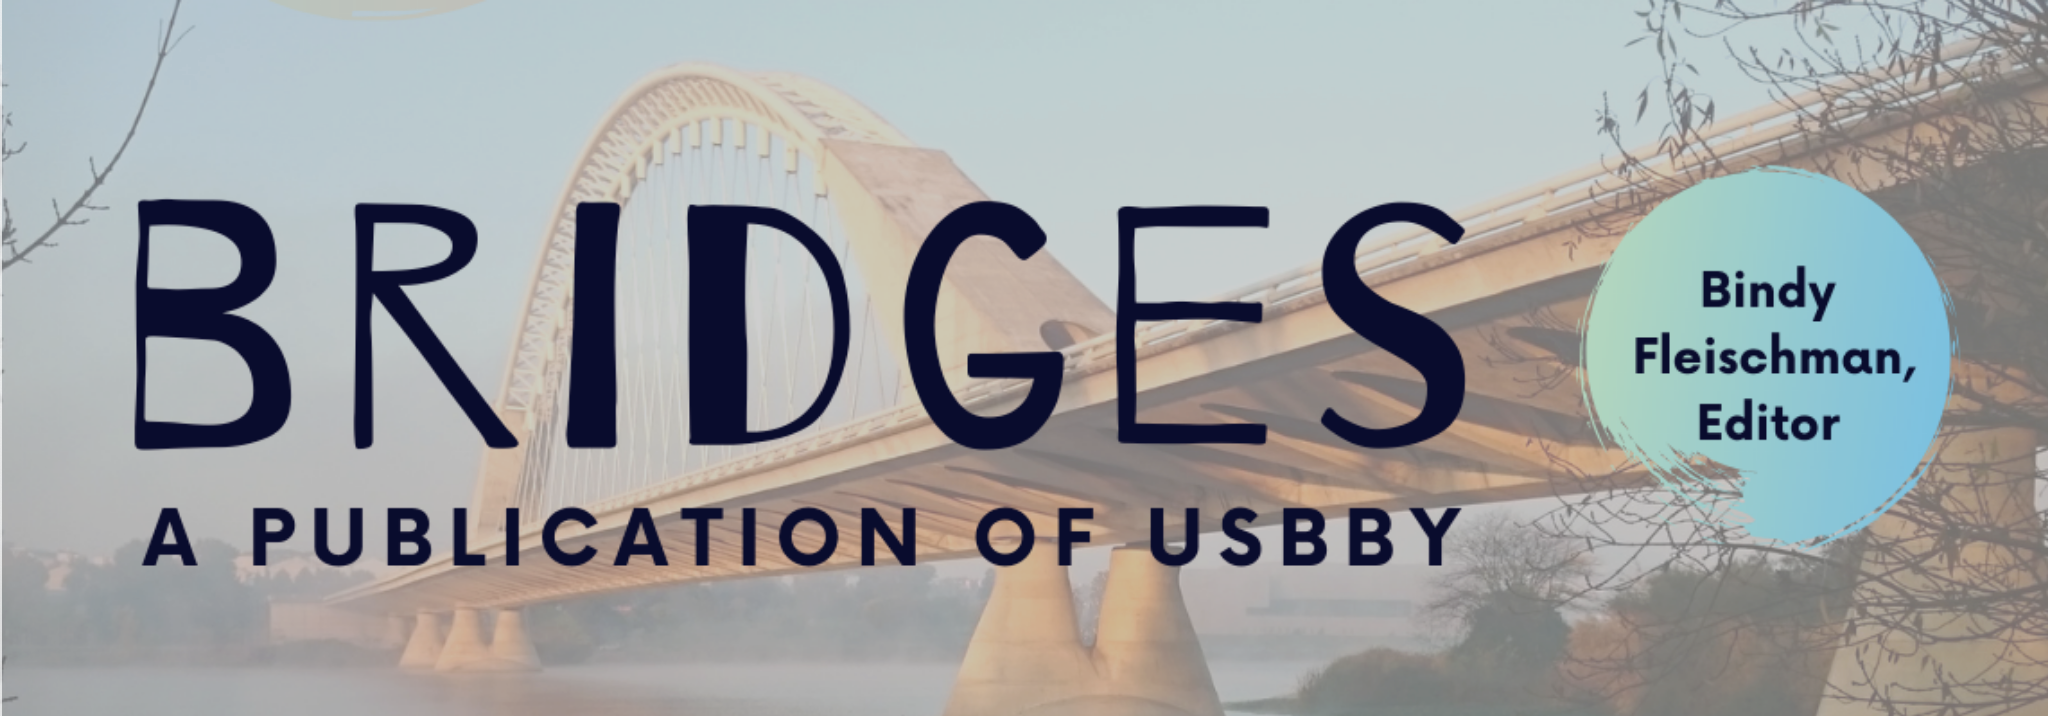 Post image for Bridges: A Publication of USBBY featuring a photograph of a bridge in the background and the publication's name in black over top of it. To the right of the text is a blue circle with the text "Bindy Fleischman, Editor" inside of it.